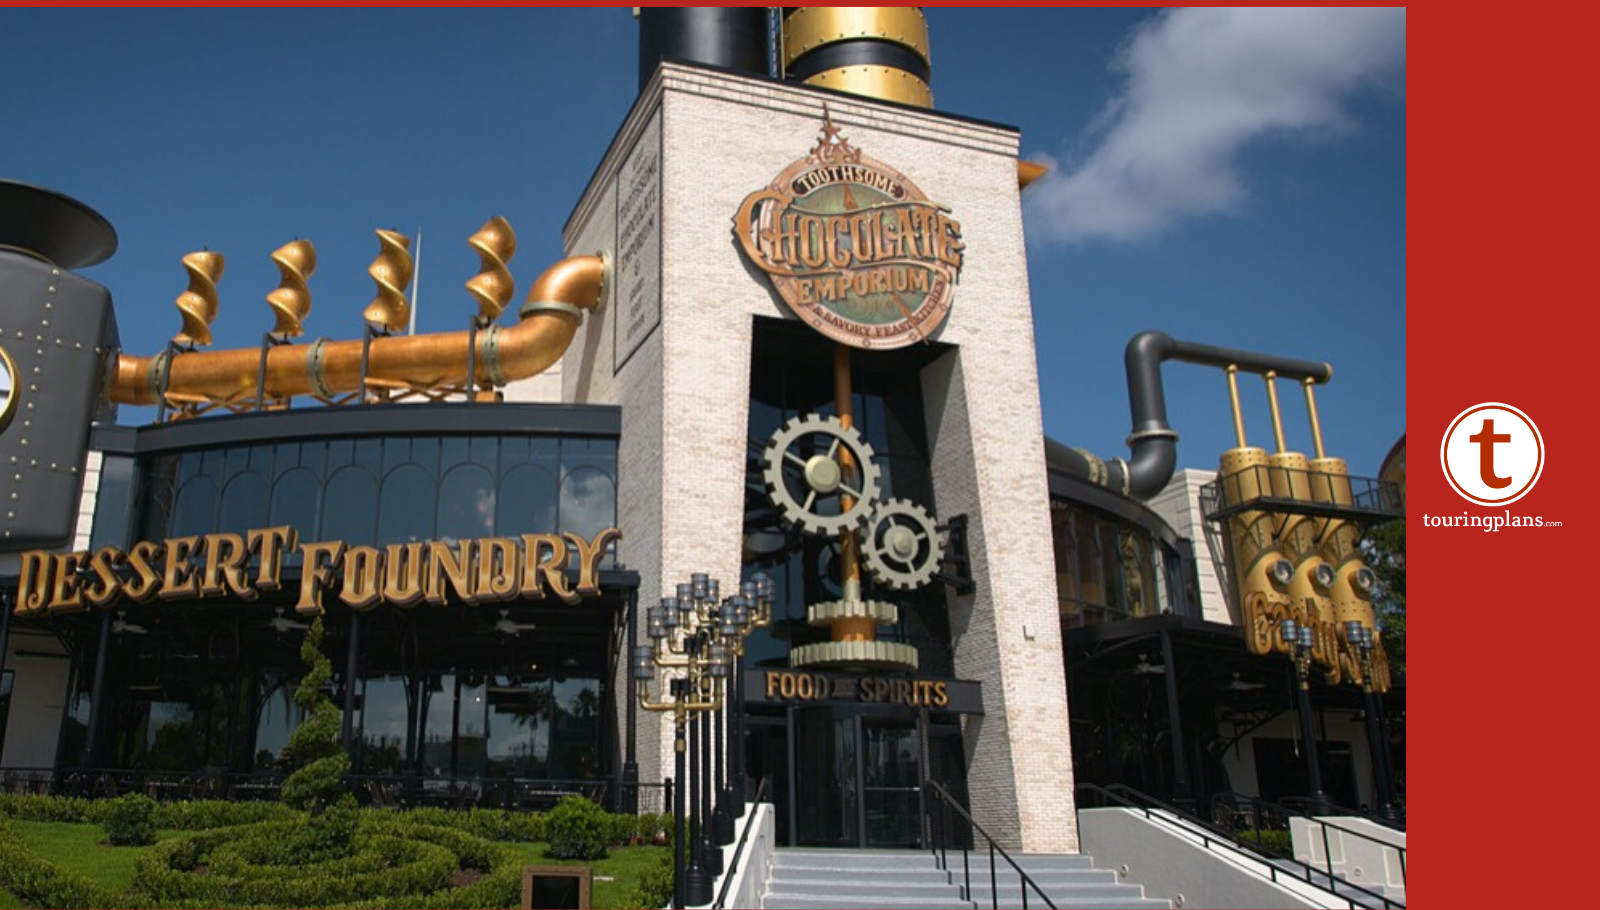 The Toothsome Chocolate Emporium & Savory Feast Kitchen